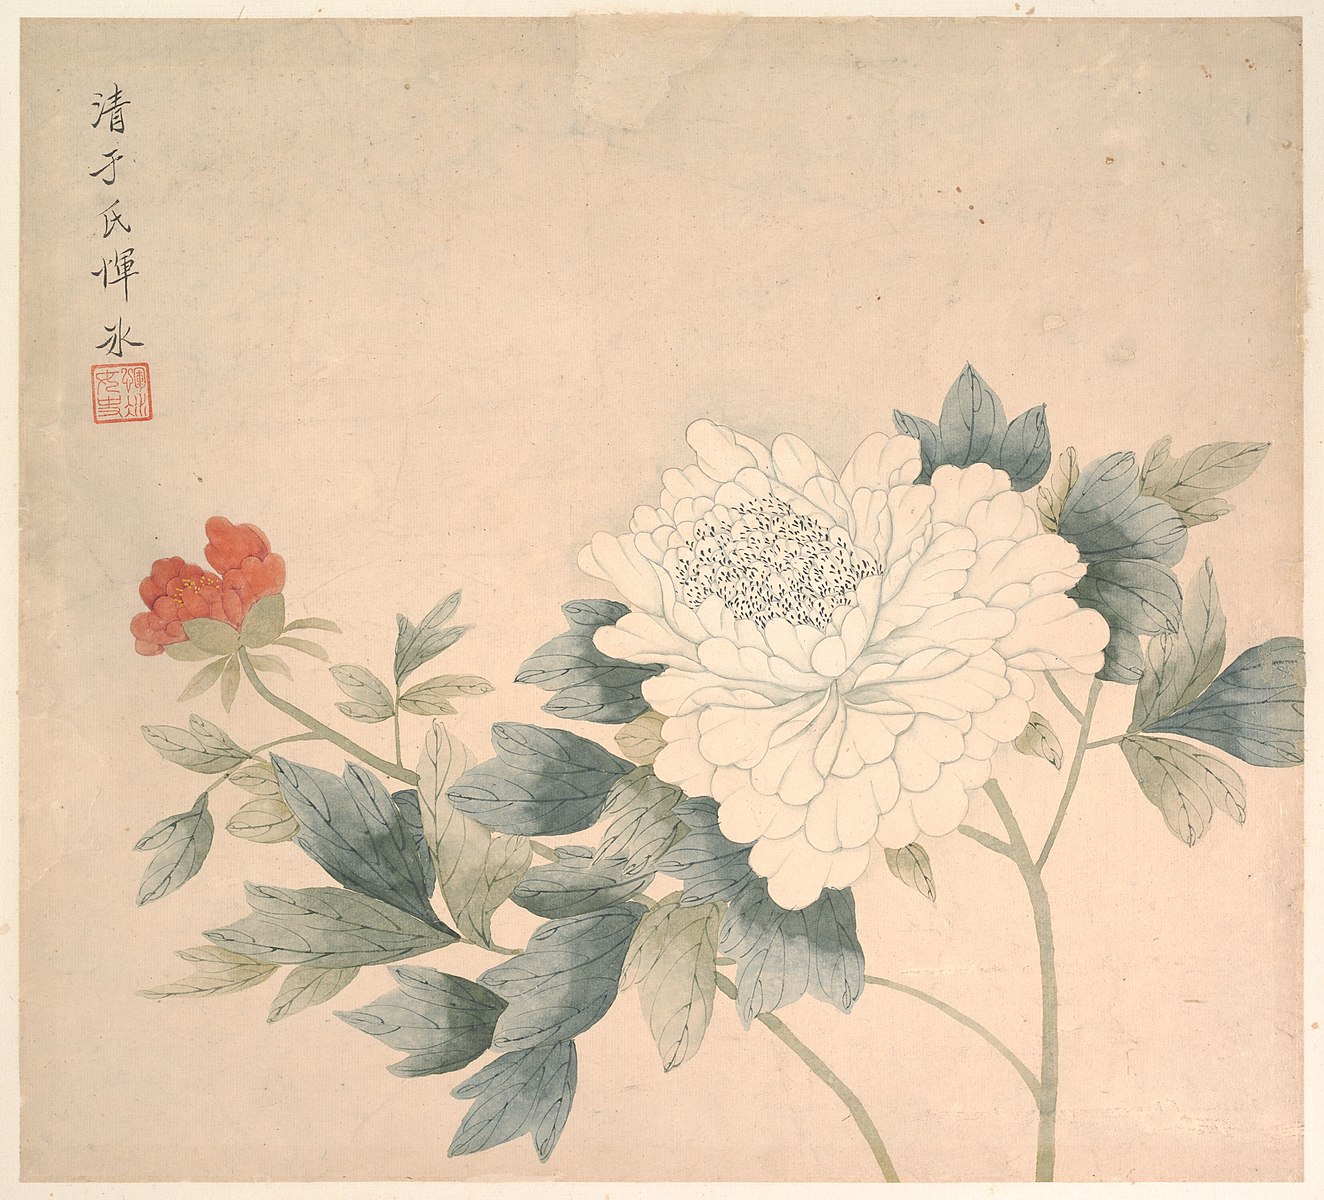 A white flower with a red bud and green foliage with Calligraphy.